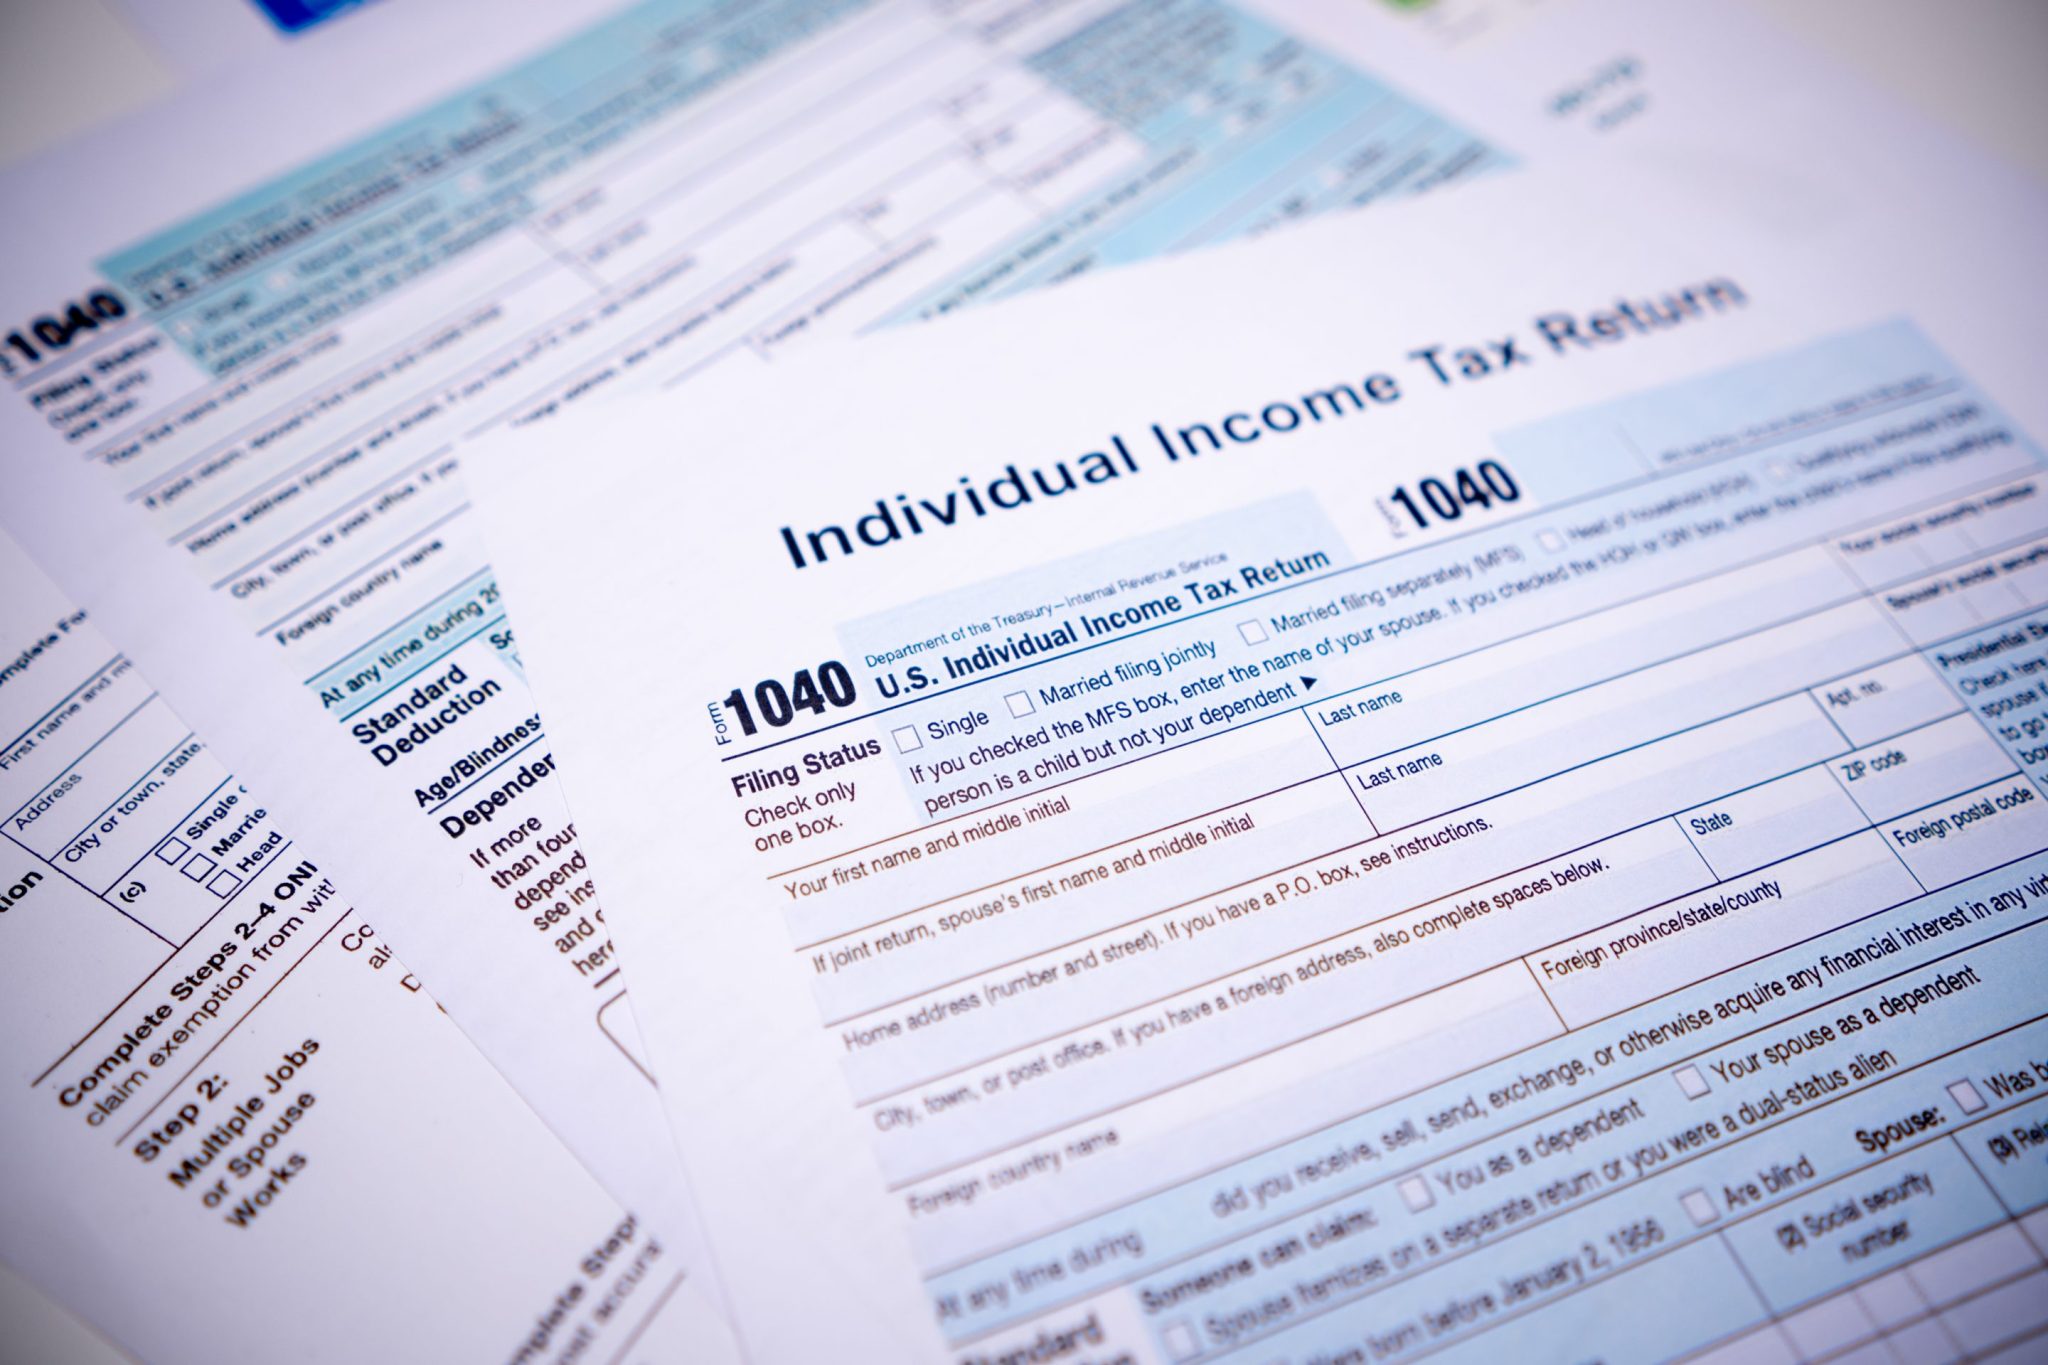 7 tax tips to make sure you get the biggest refund, according to financial advisors